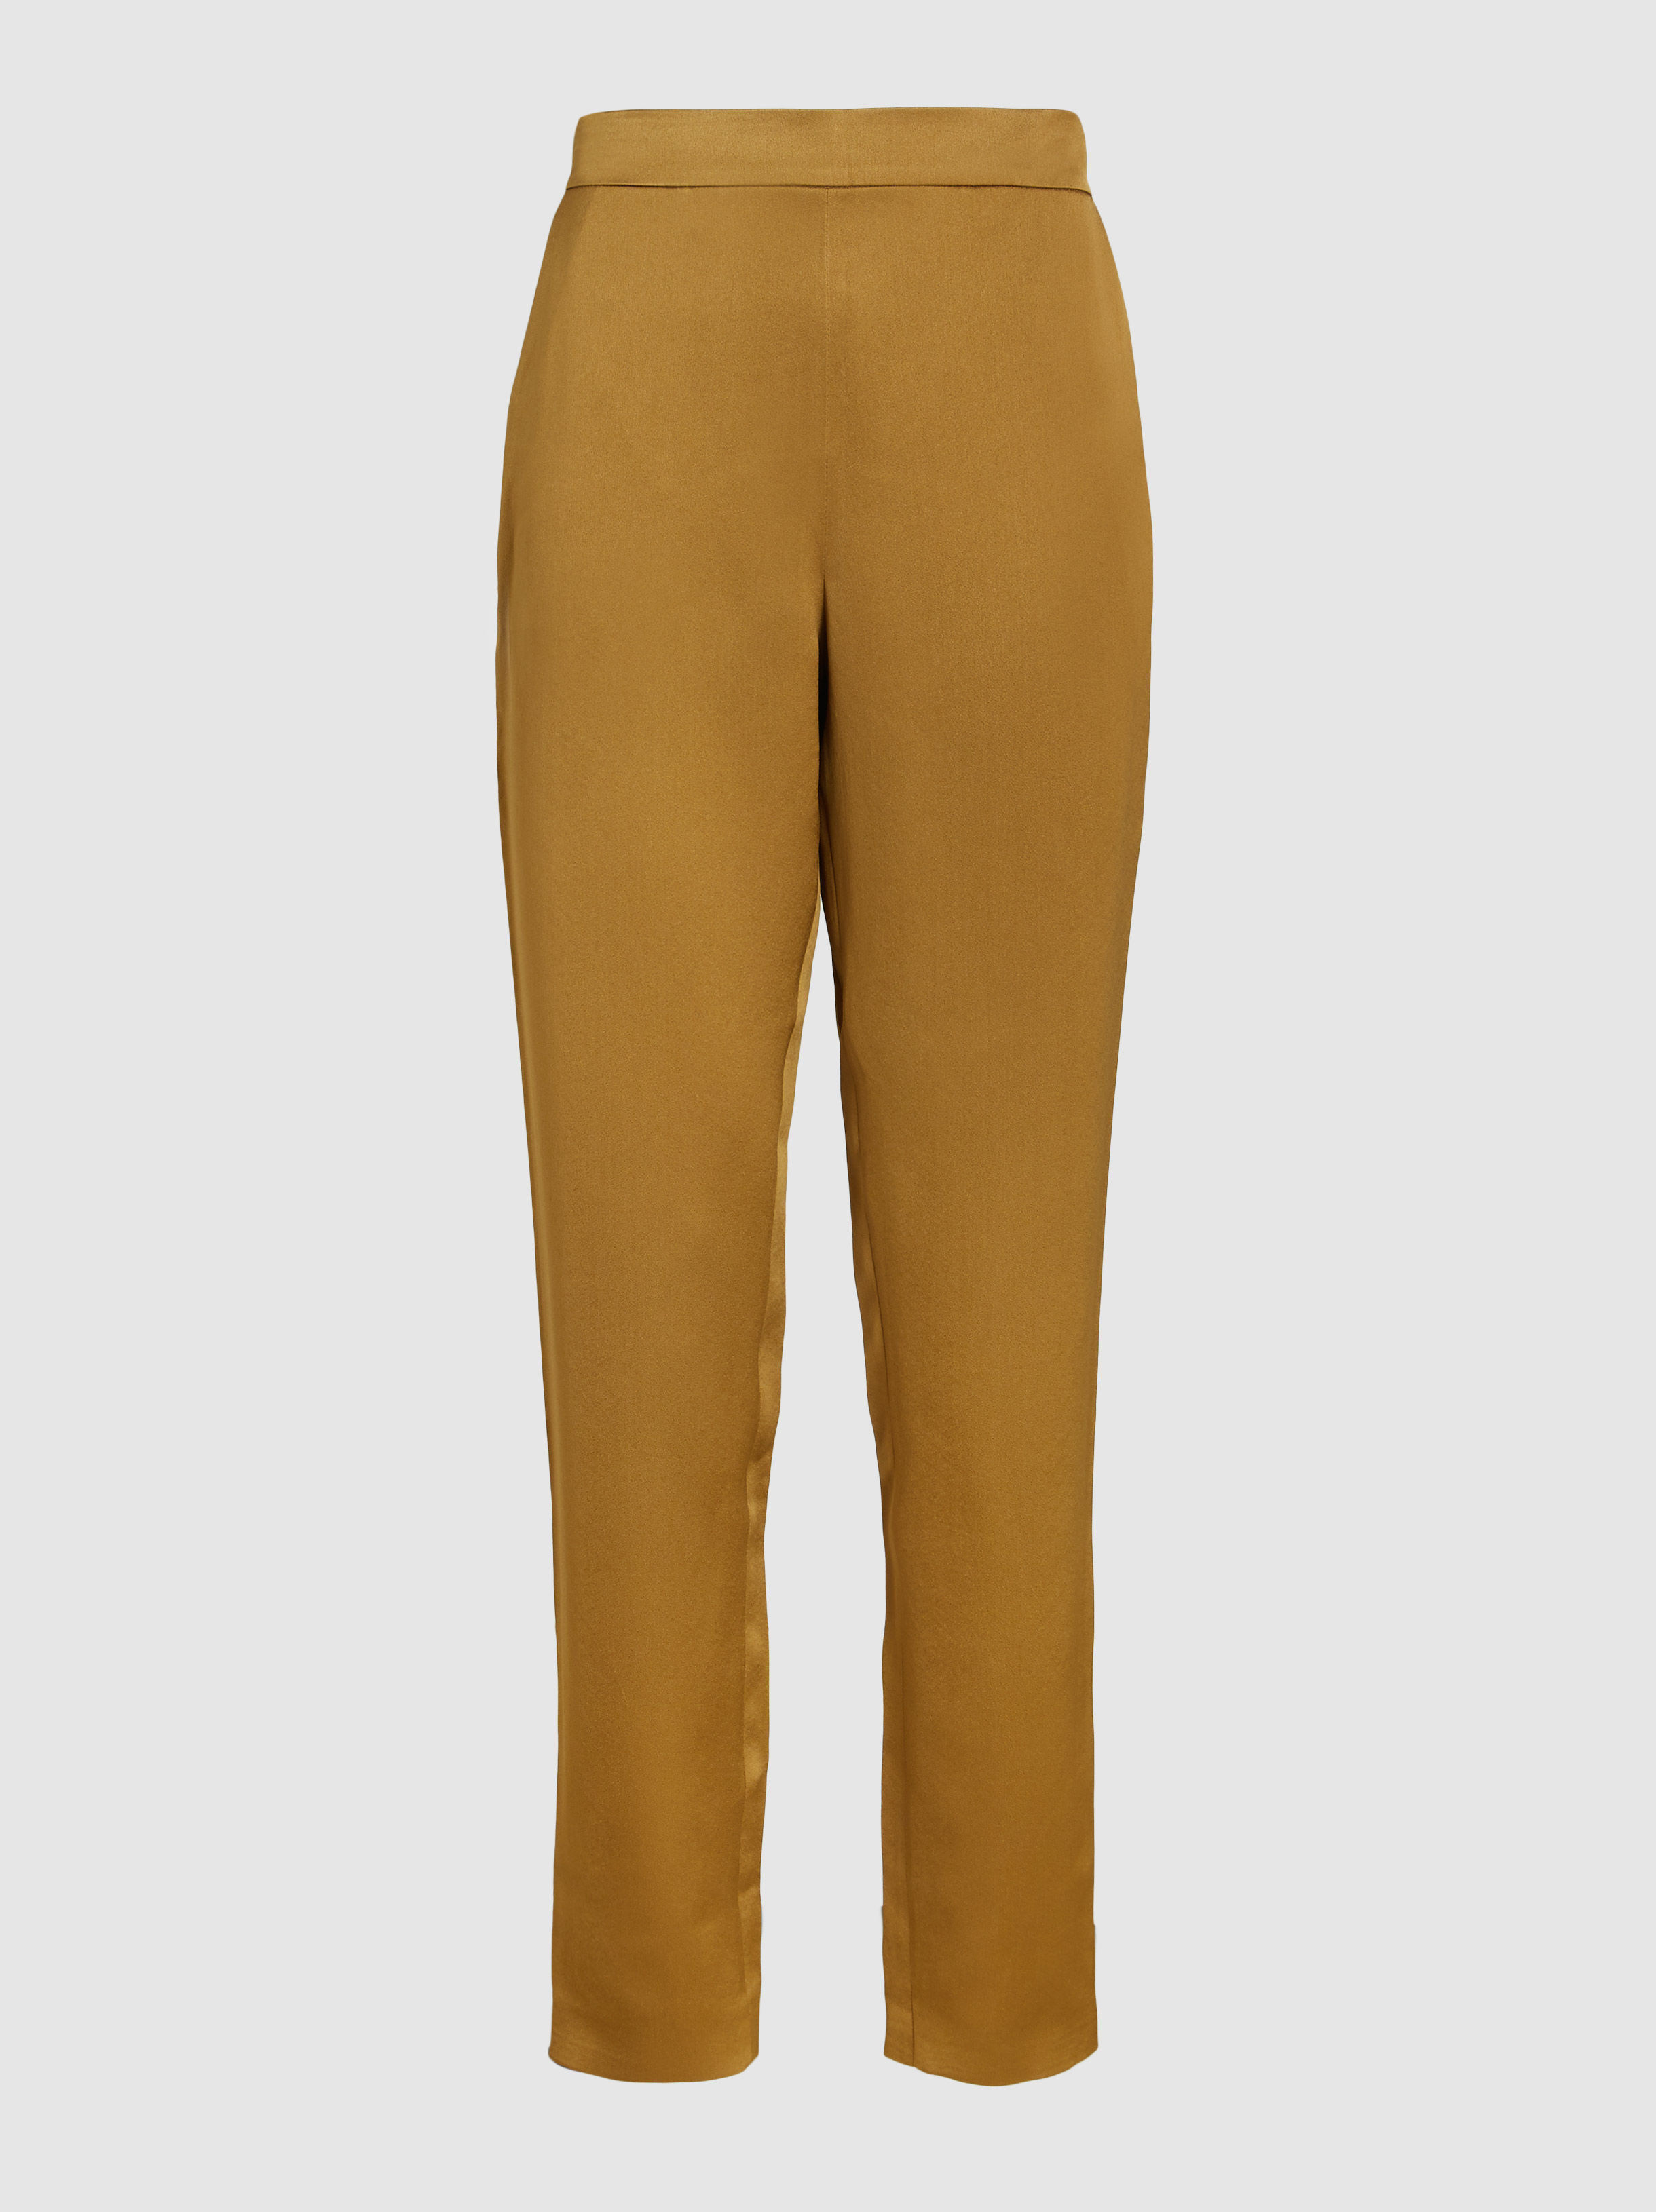 LAYEUR - Rosa Tapered Crepe Trousers | The Modist